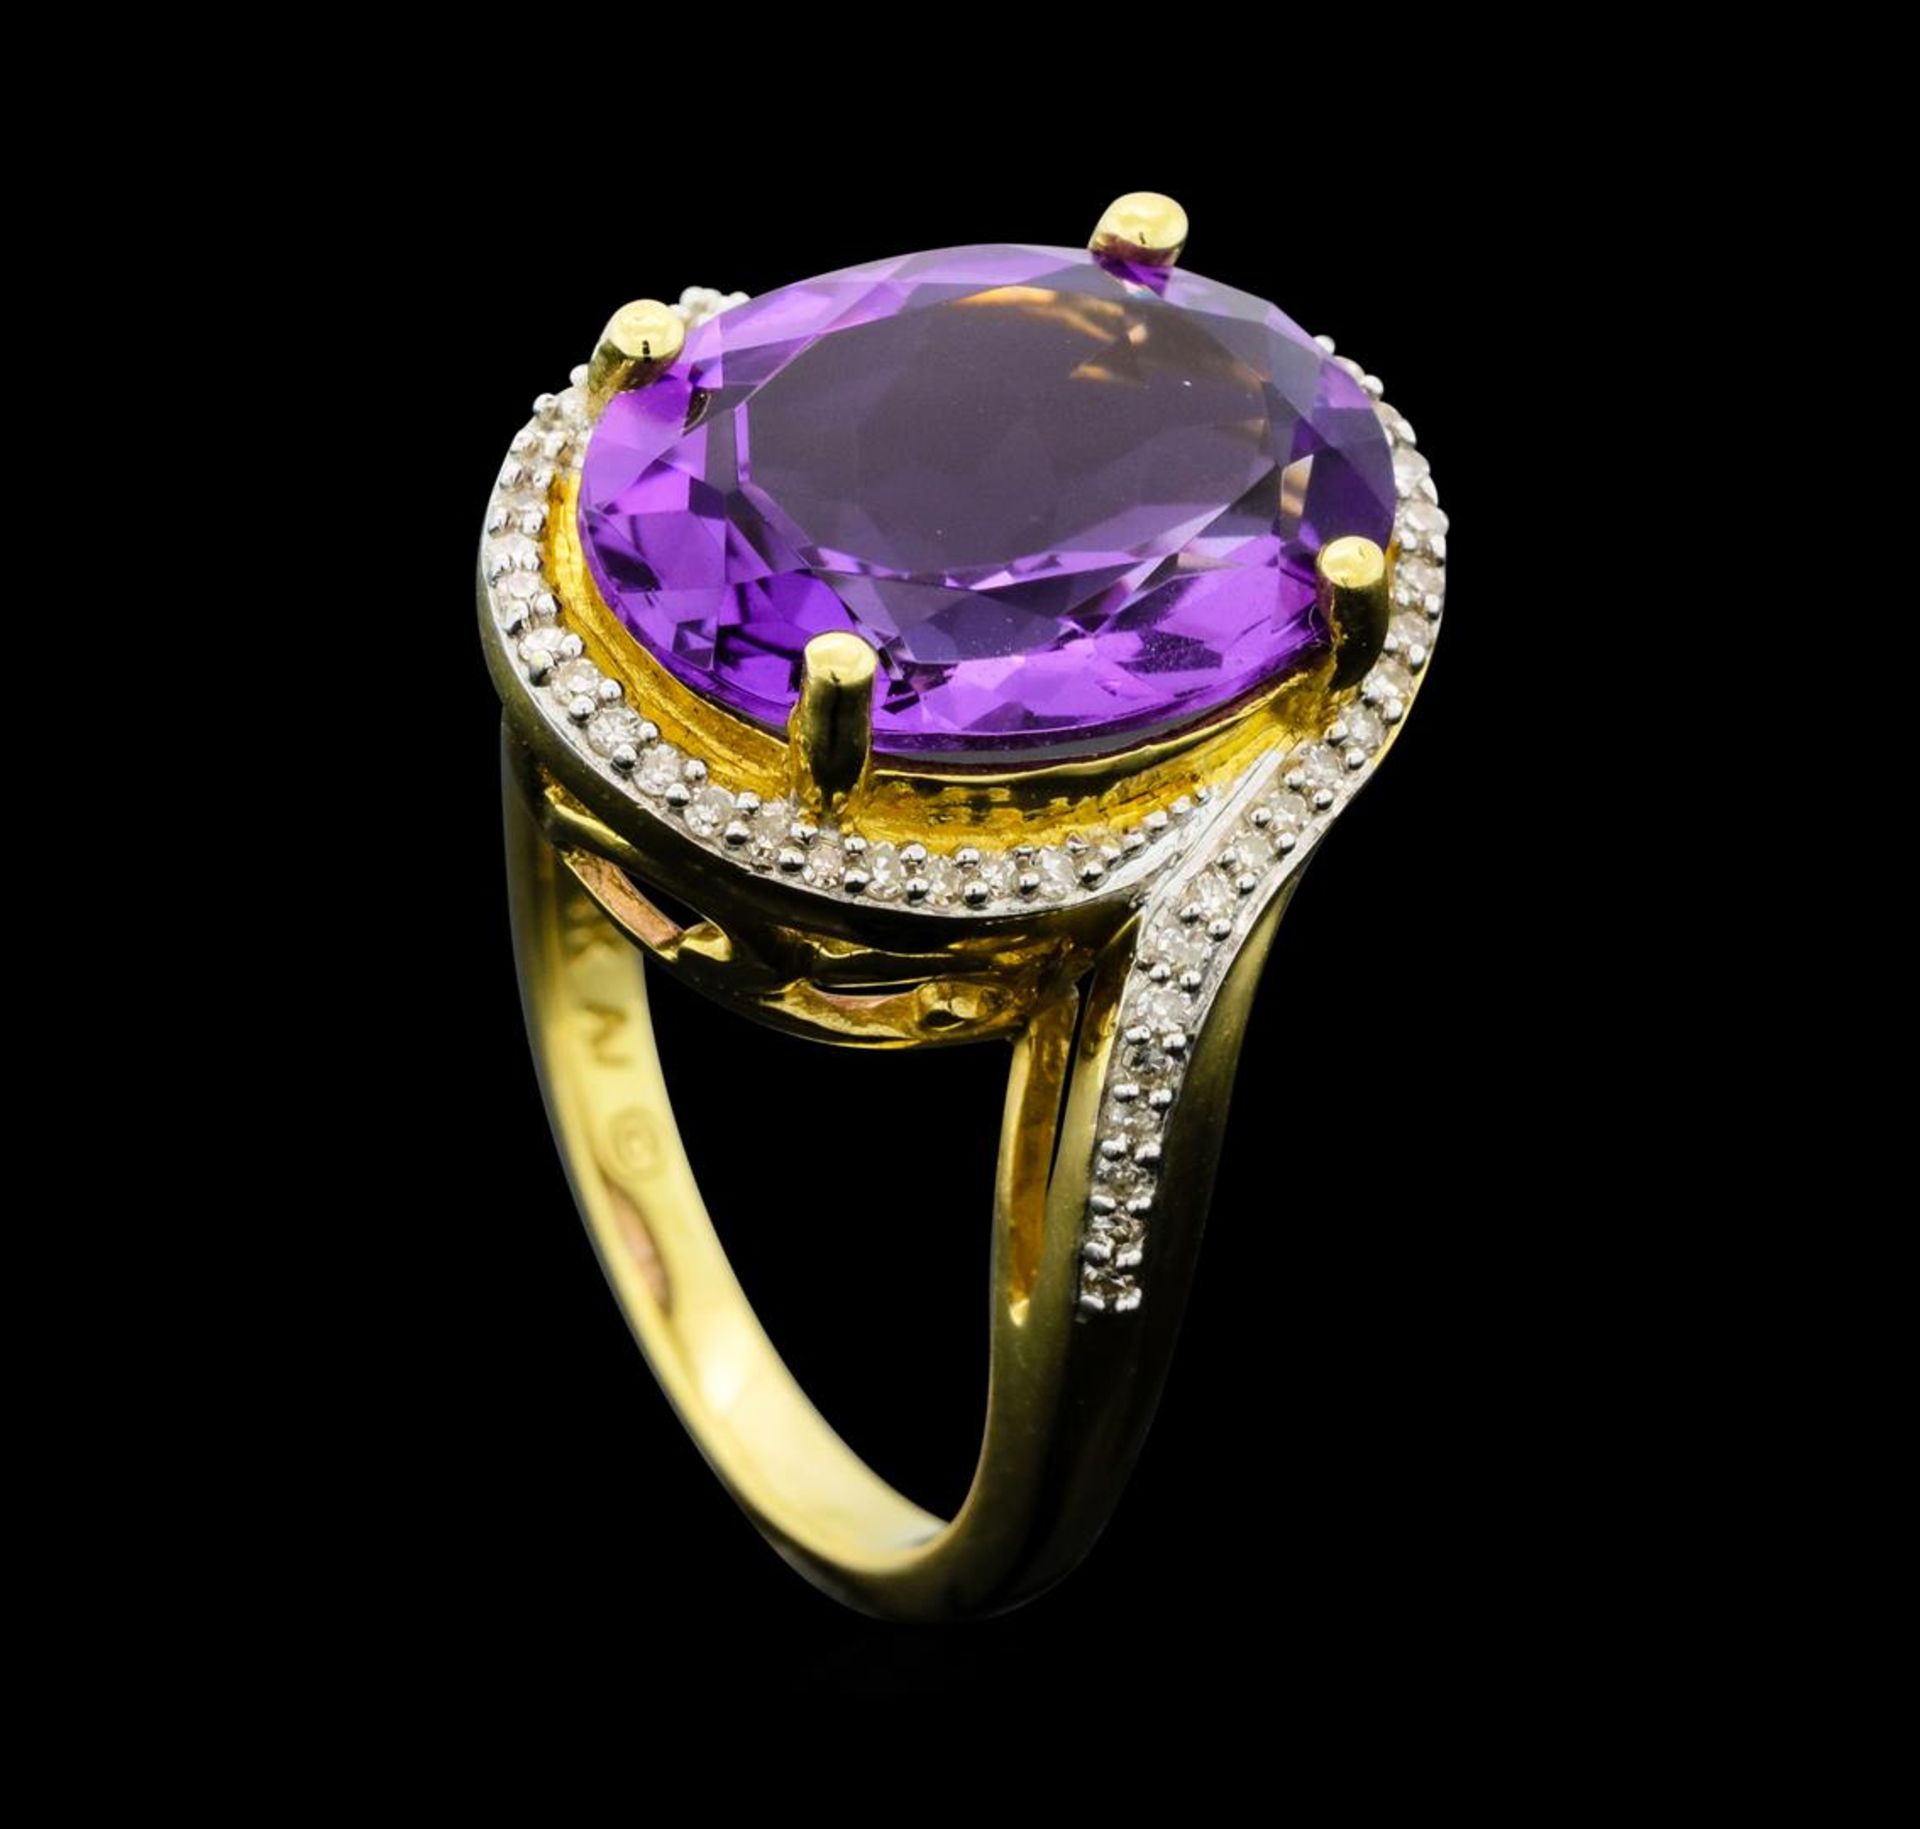 4.90 ct Amethyst And Diamond Ring - 14KT Yellow Gold - Image 4 of 5